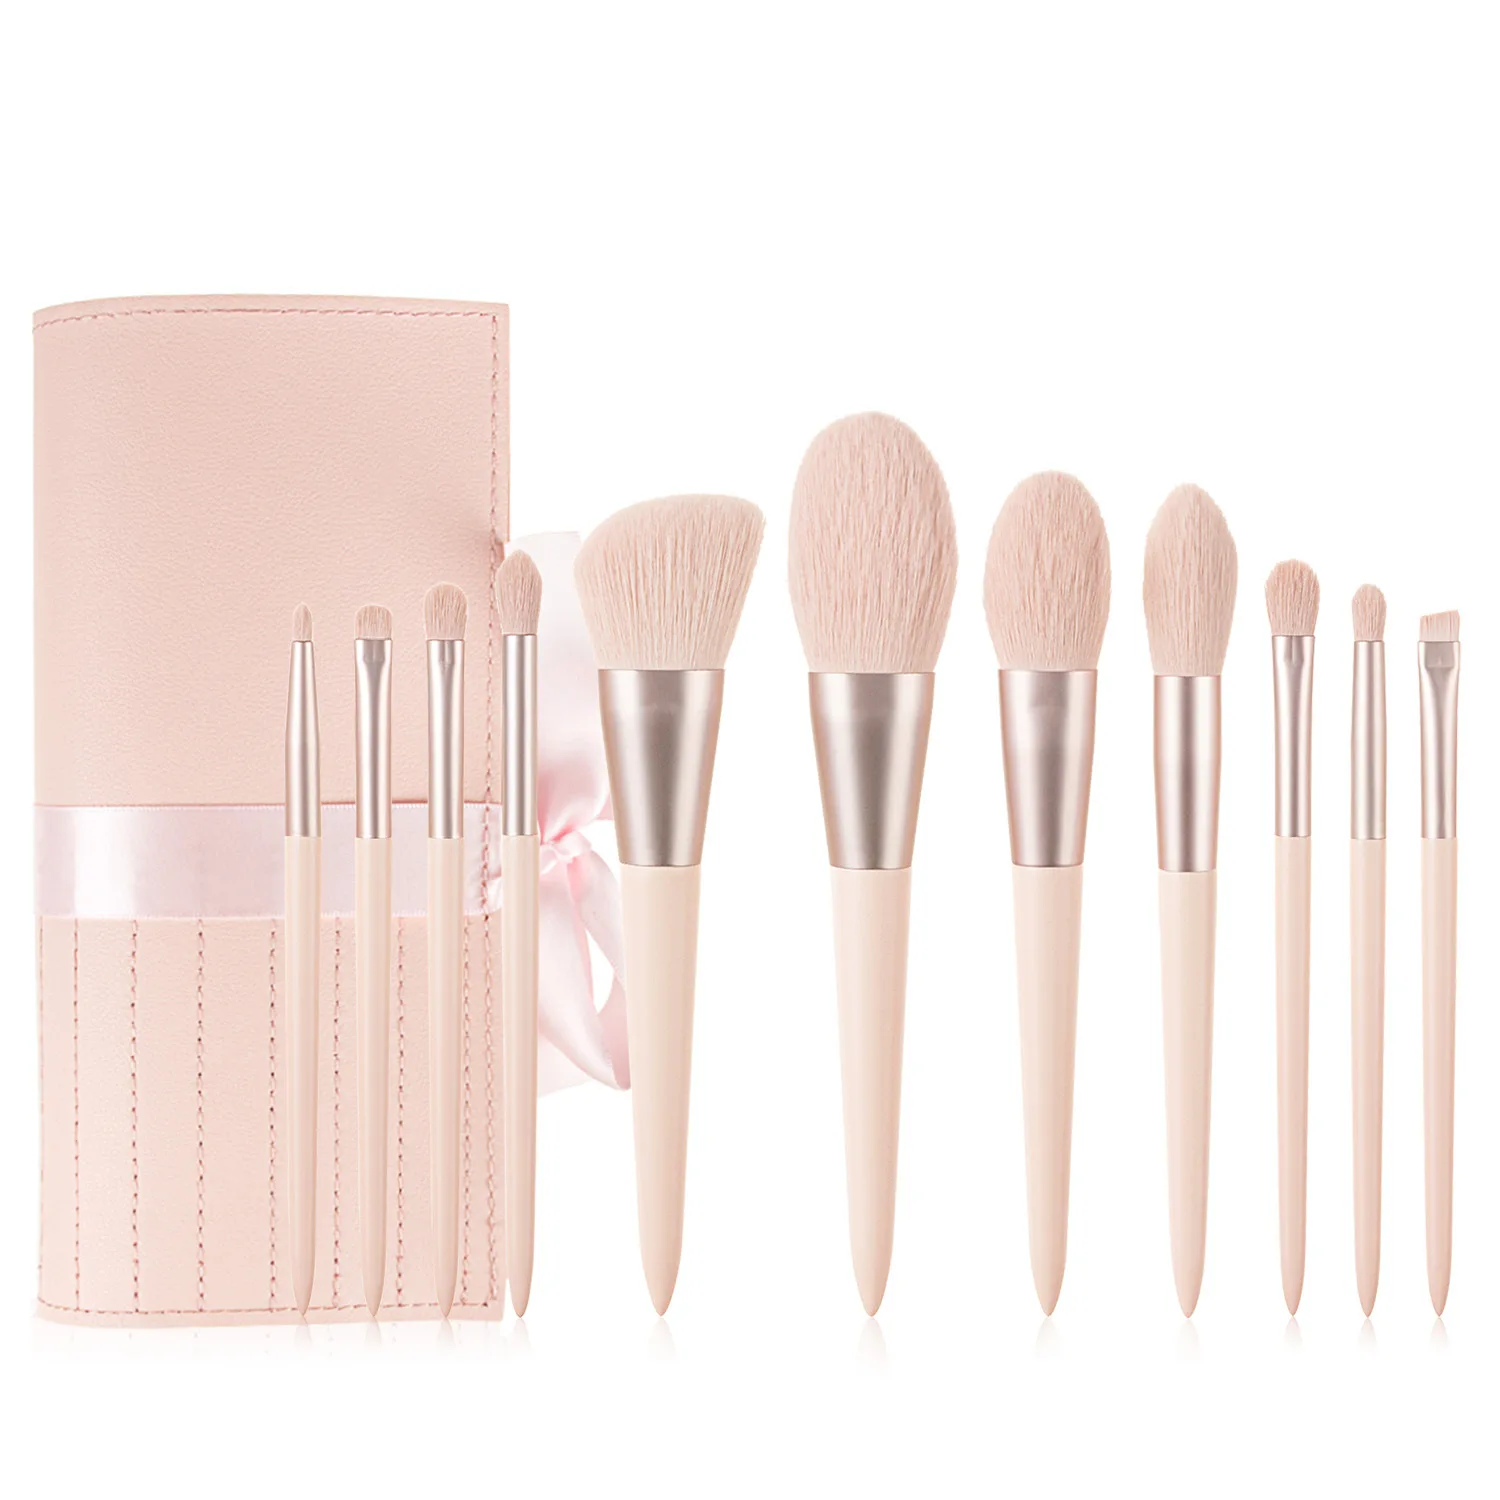 

HMU LOW MOQ Vegan Make Up Brushes Private Label Synthetic Hair Wooden Beauty Tool Women Wholesale Custom Hot Pink Makeup Brush